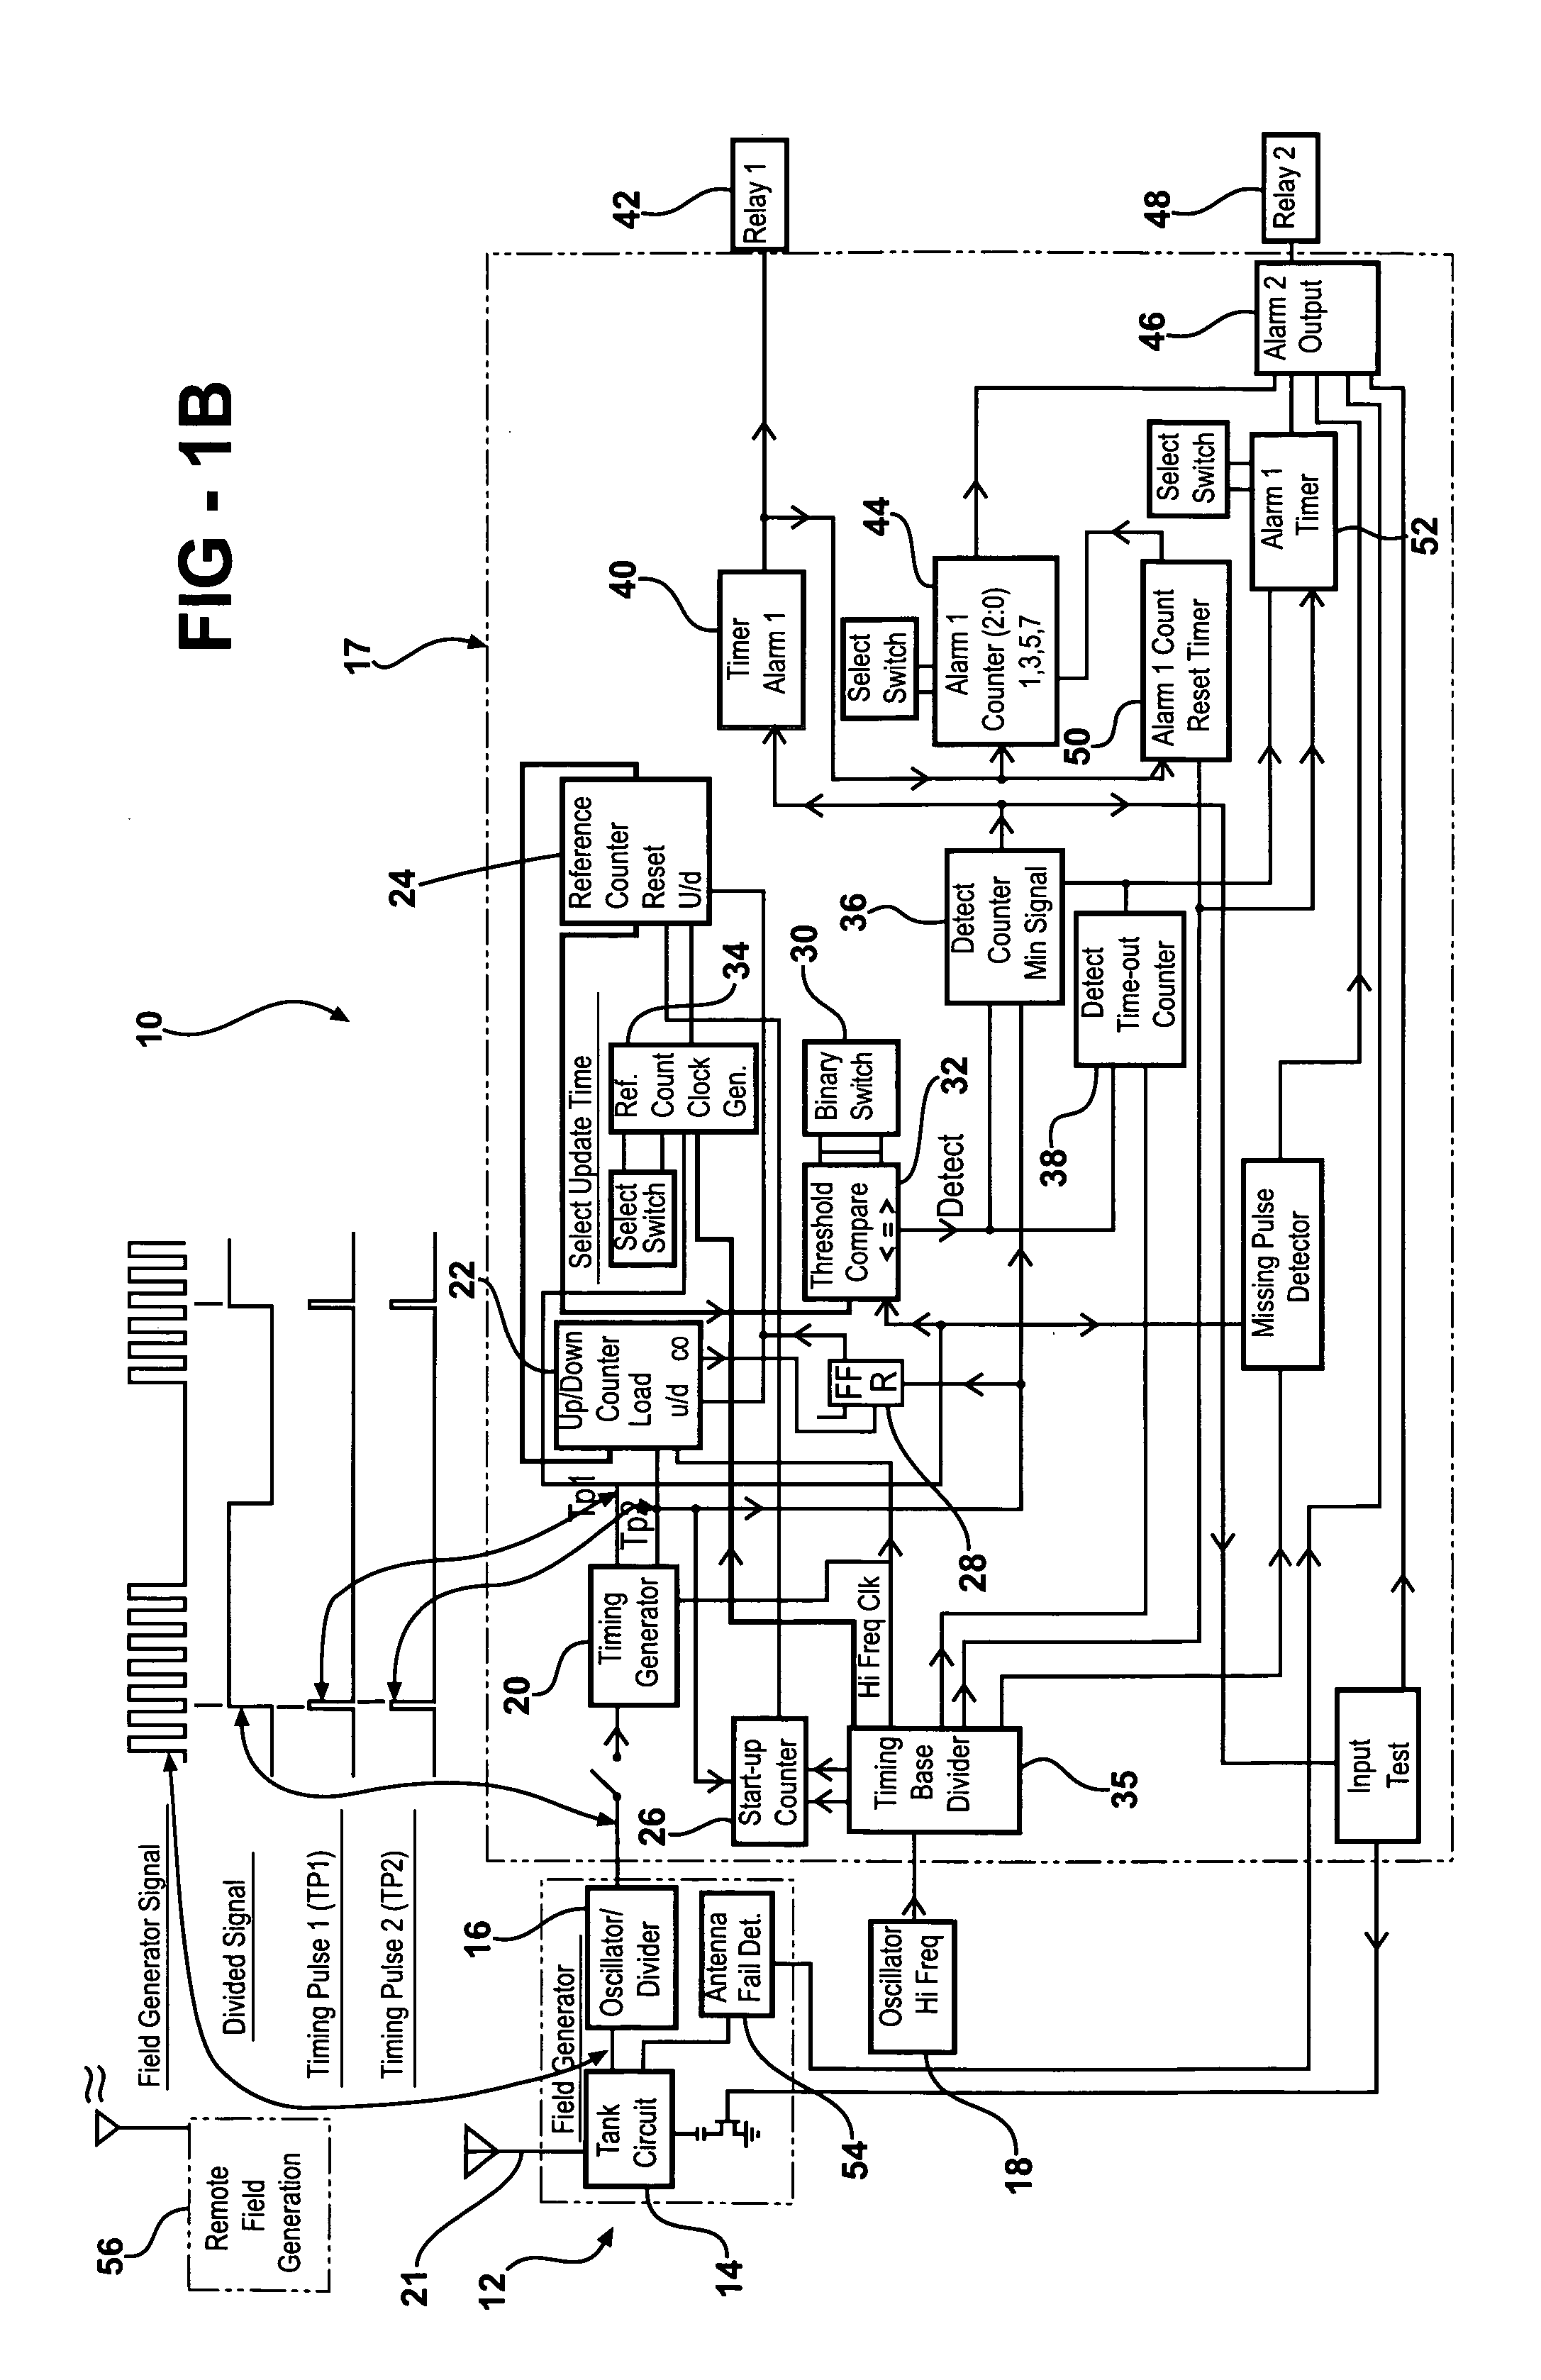 Digital capacitive sensing device for security and safety applications